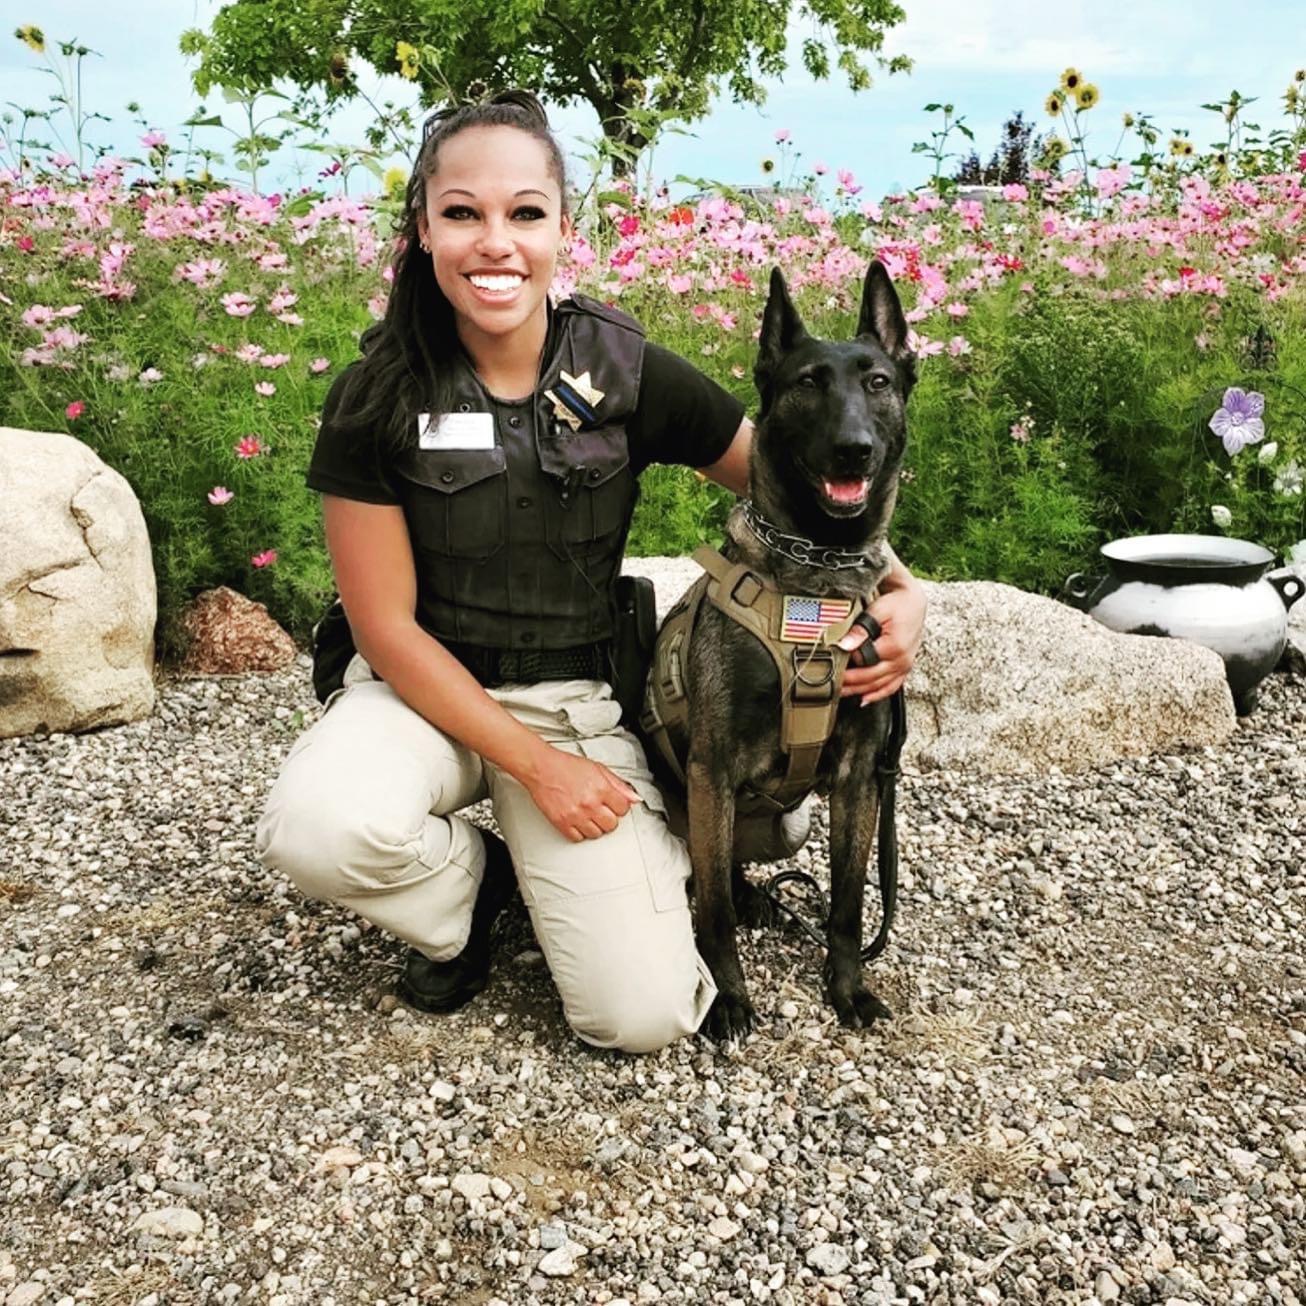 Grand Sierra Resort Sahara K 9 Security Unit Is A Hard Working Gsr Team Member Safety Is One Of Our Most Important Values Gsrstrong Gsrcares Safetyfirst K9unit Security T Co Gmqohxf8gg Twitter